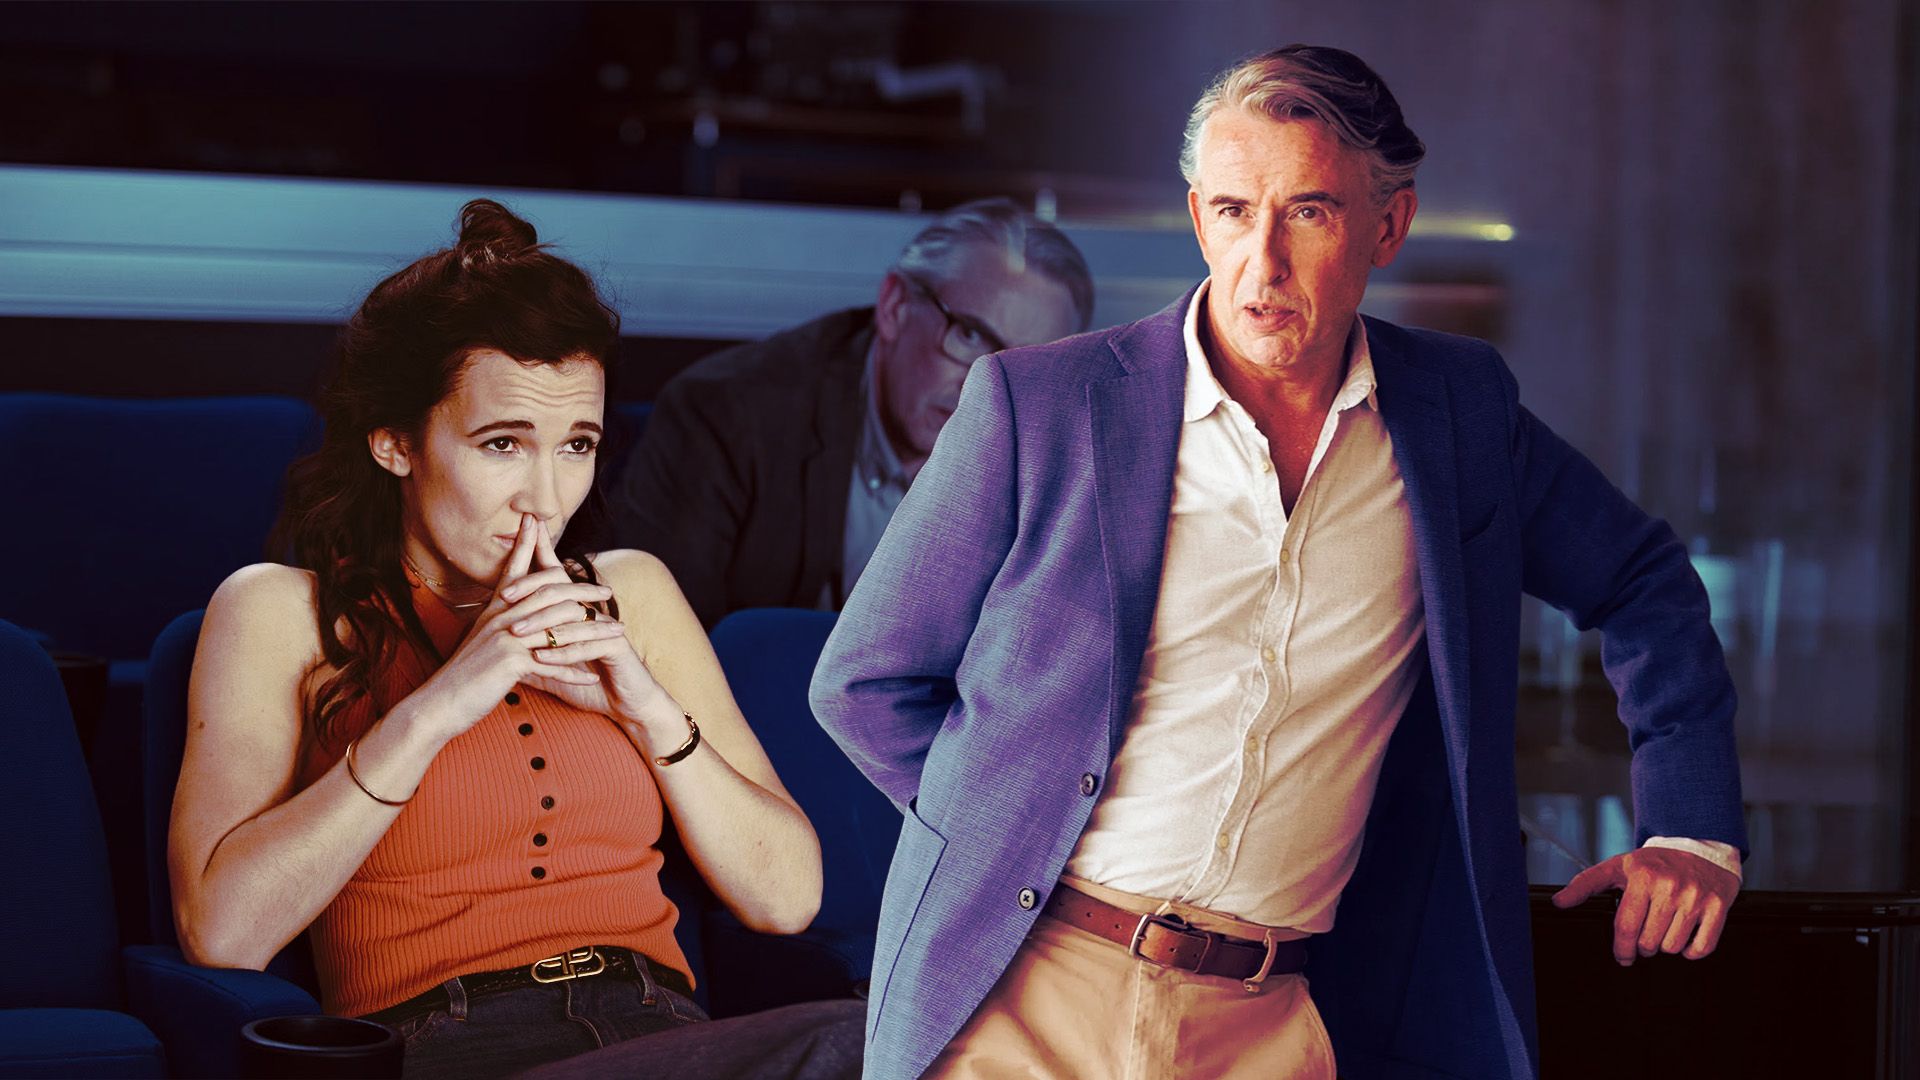 Chivalry Review | Steve Coogan & Sarah Solemani Charm in This Wicked Comedy